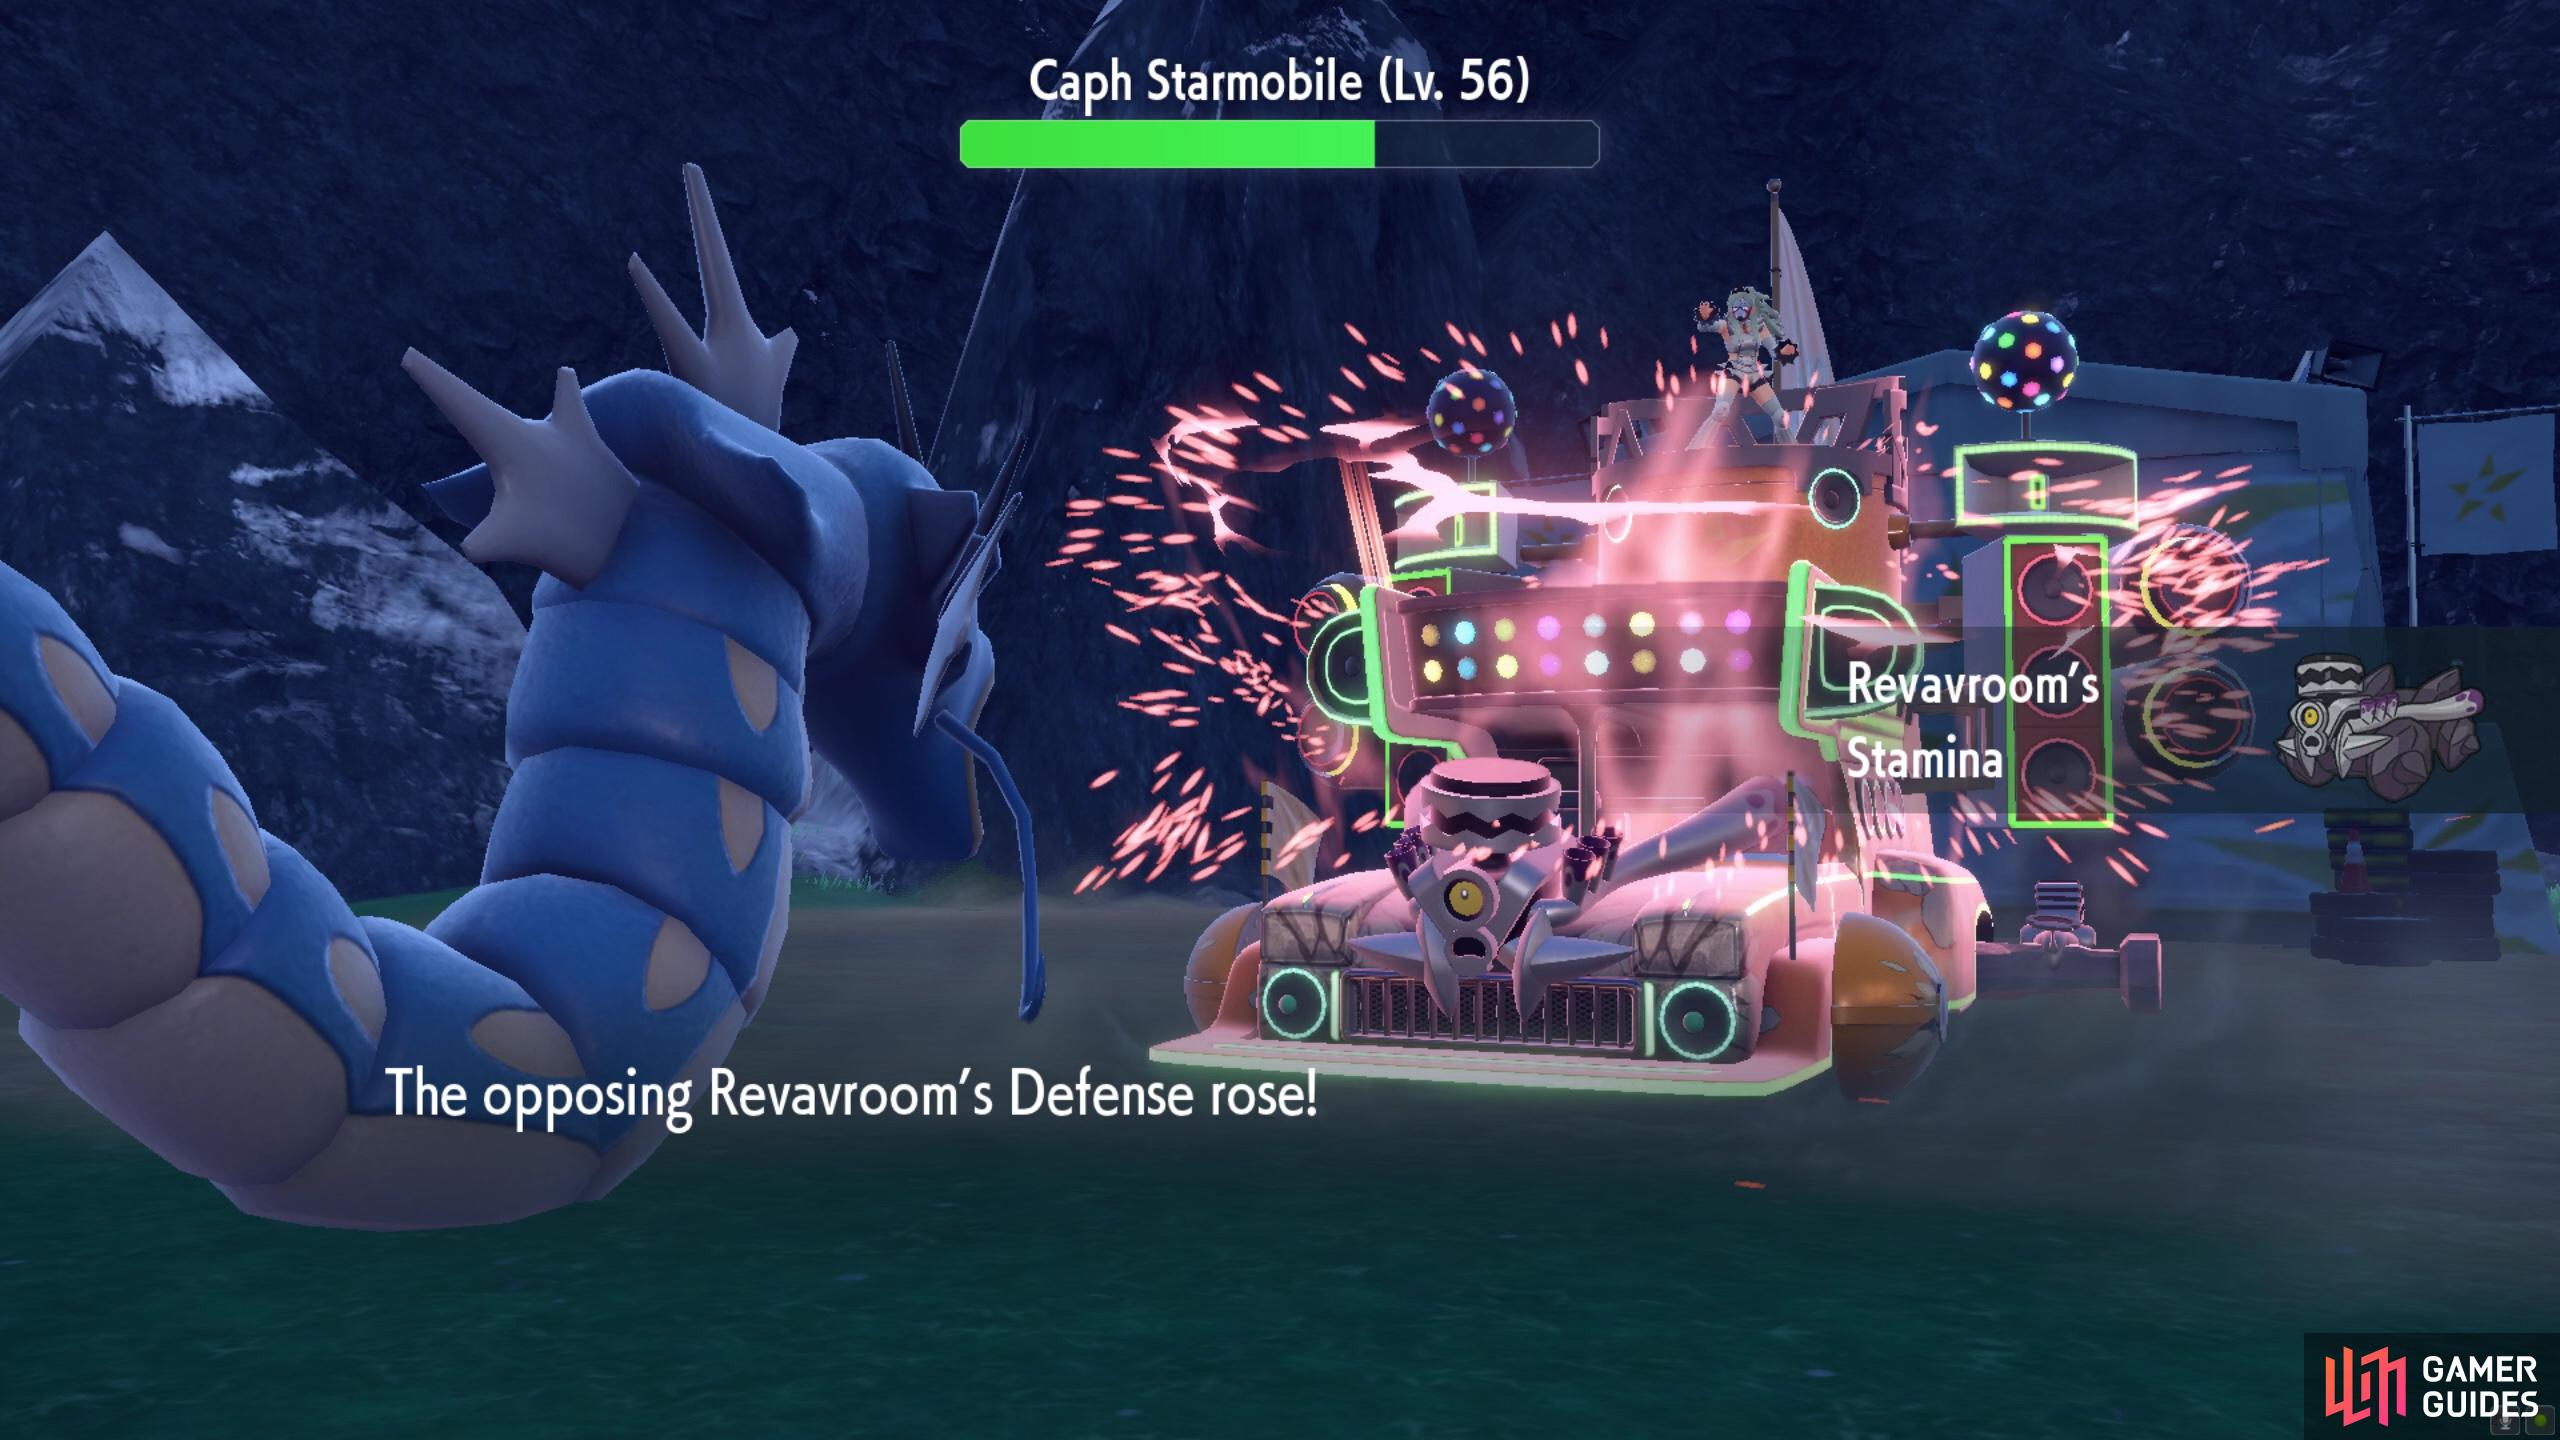 Each time the Starmobile is hit, its Defense will increase.